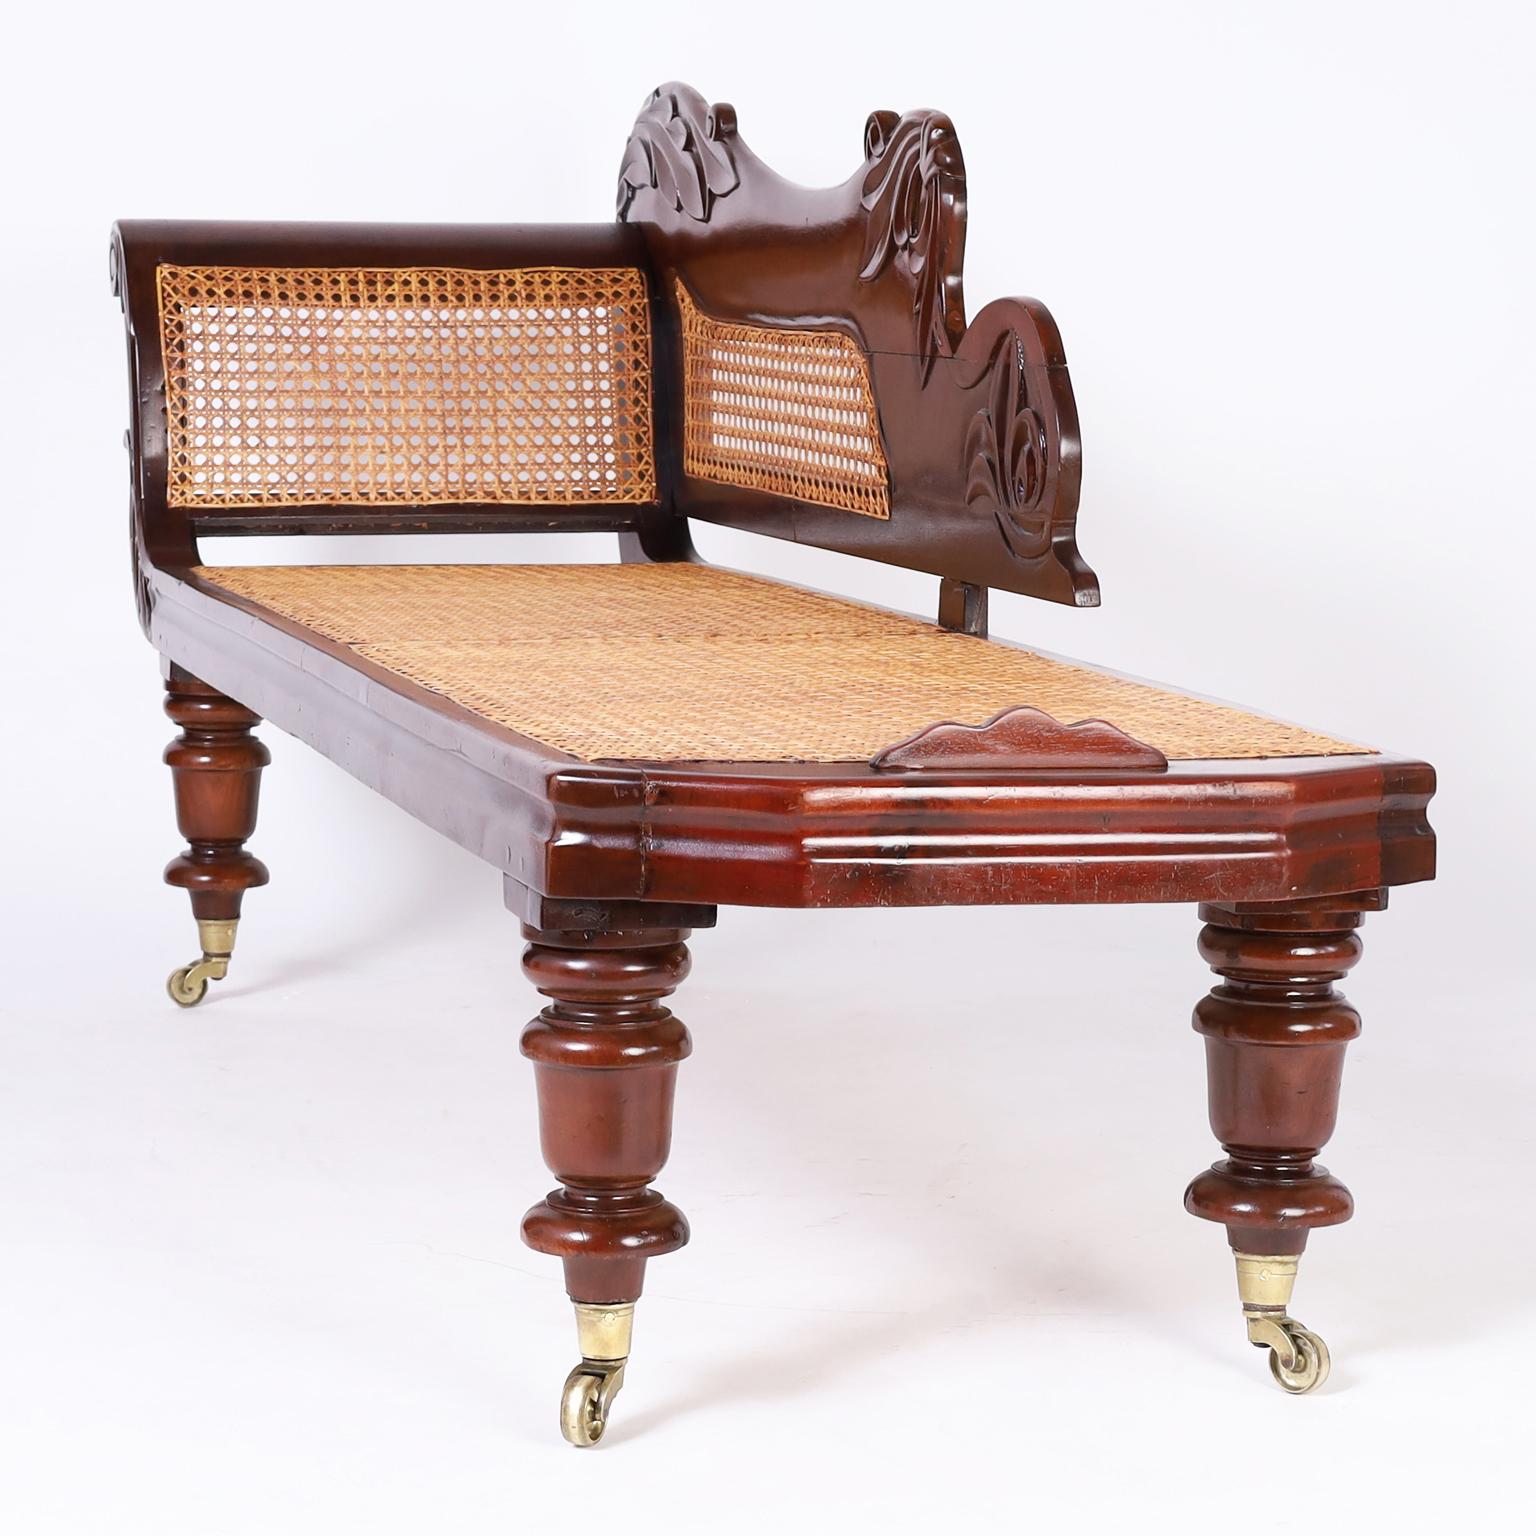 British Colonial West Indies Carved and Caned Daybed or Chaise Lounge For Sale